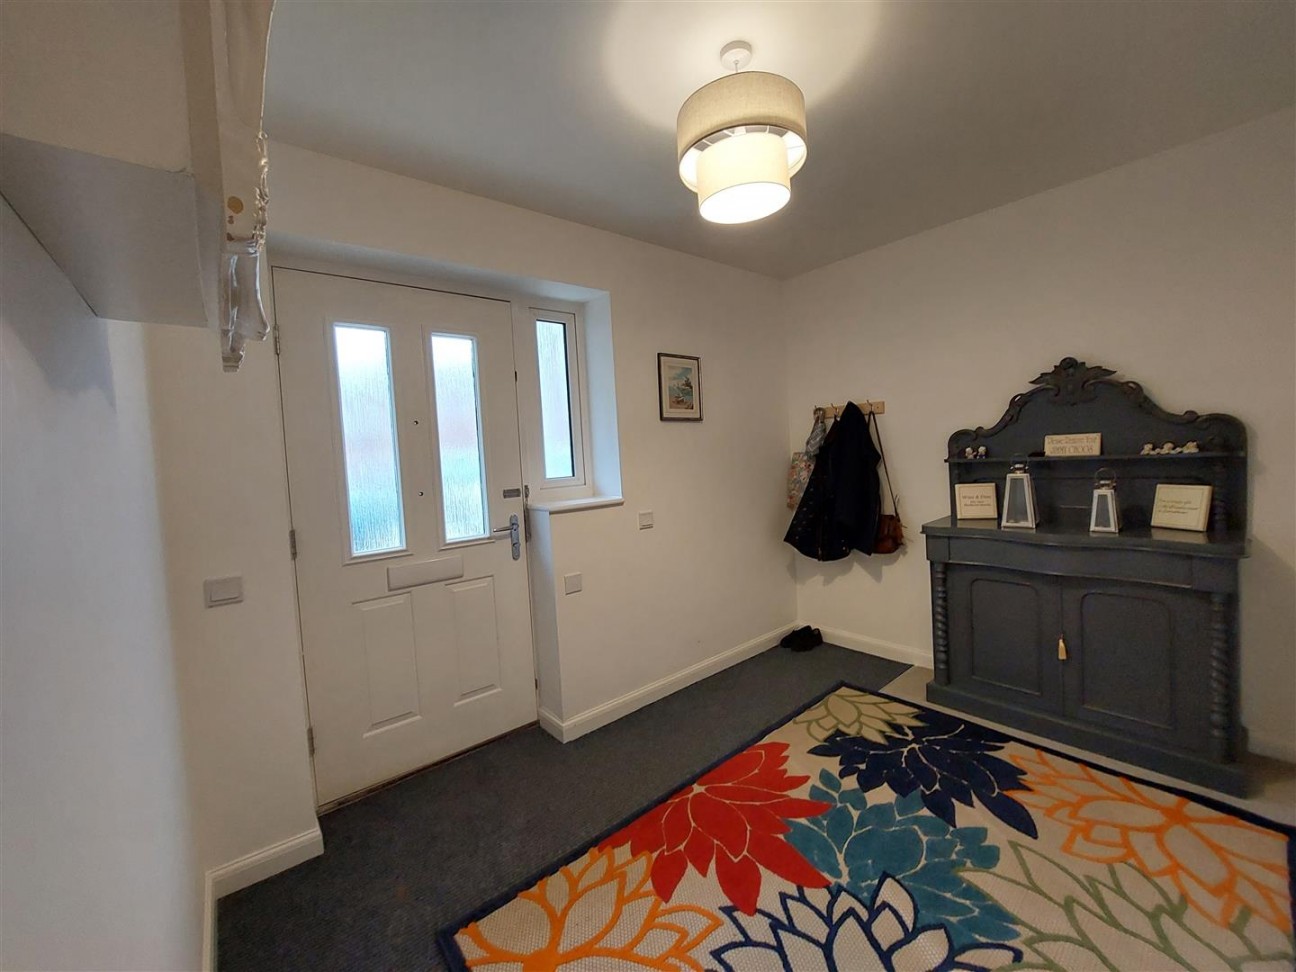 Strawberry Fields , Hempsted, SHARED OWNERSHIP